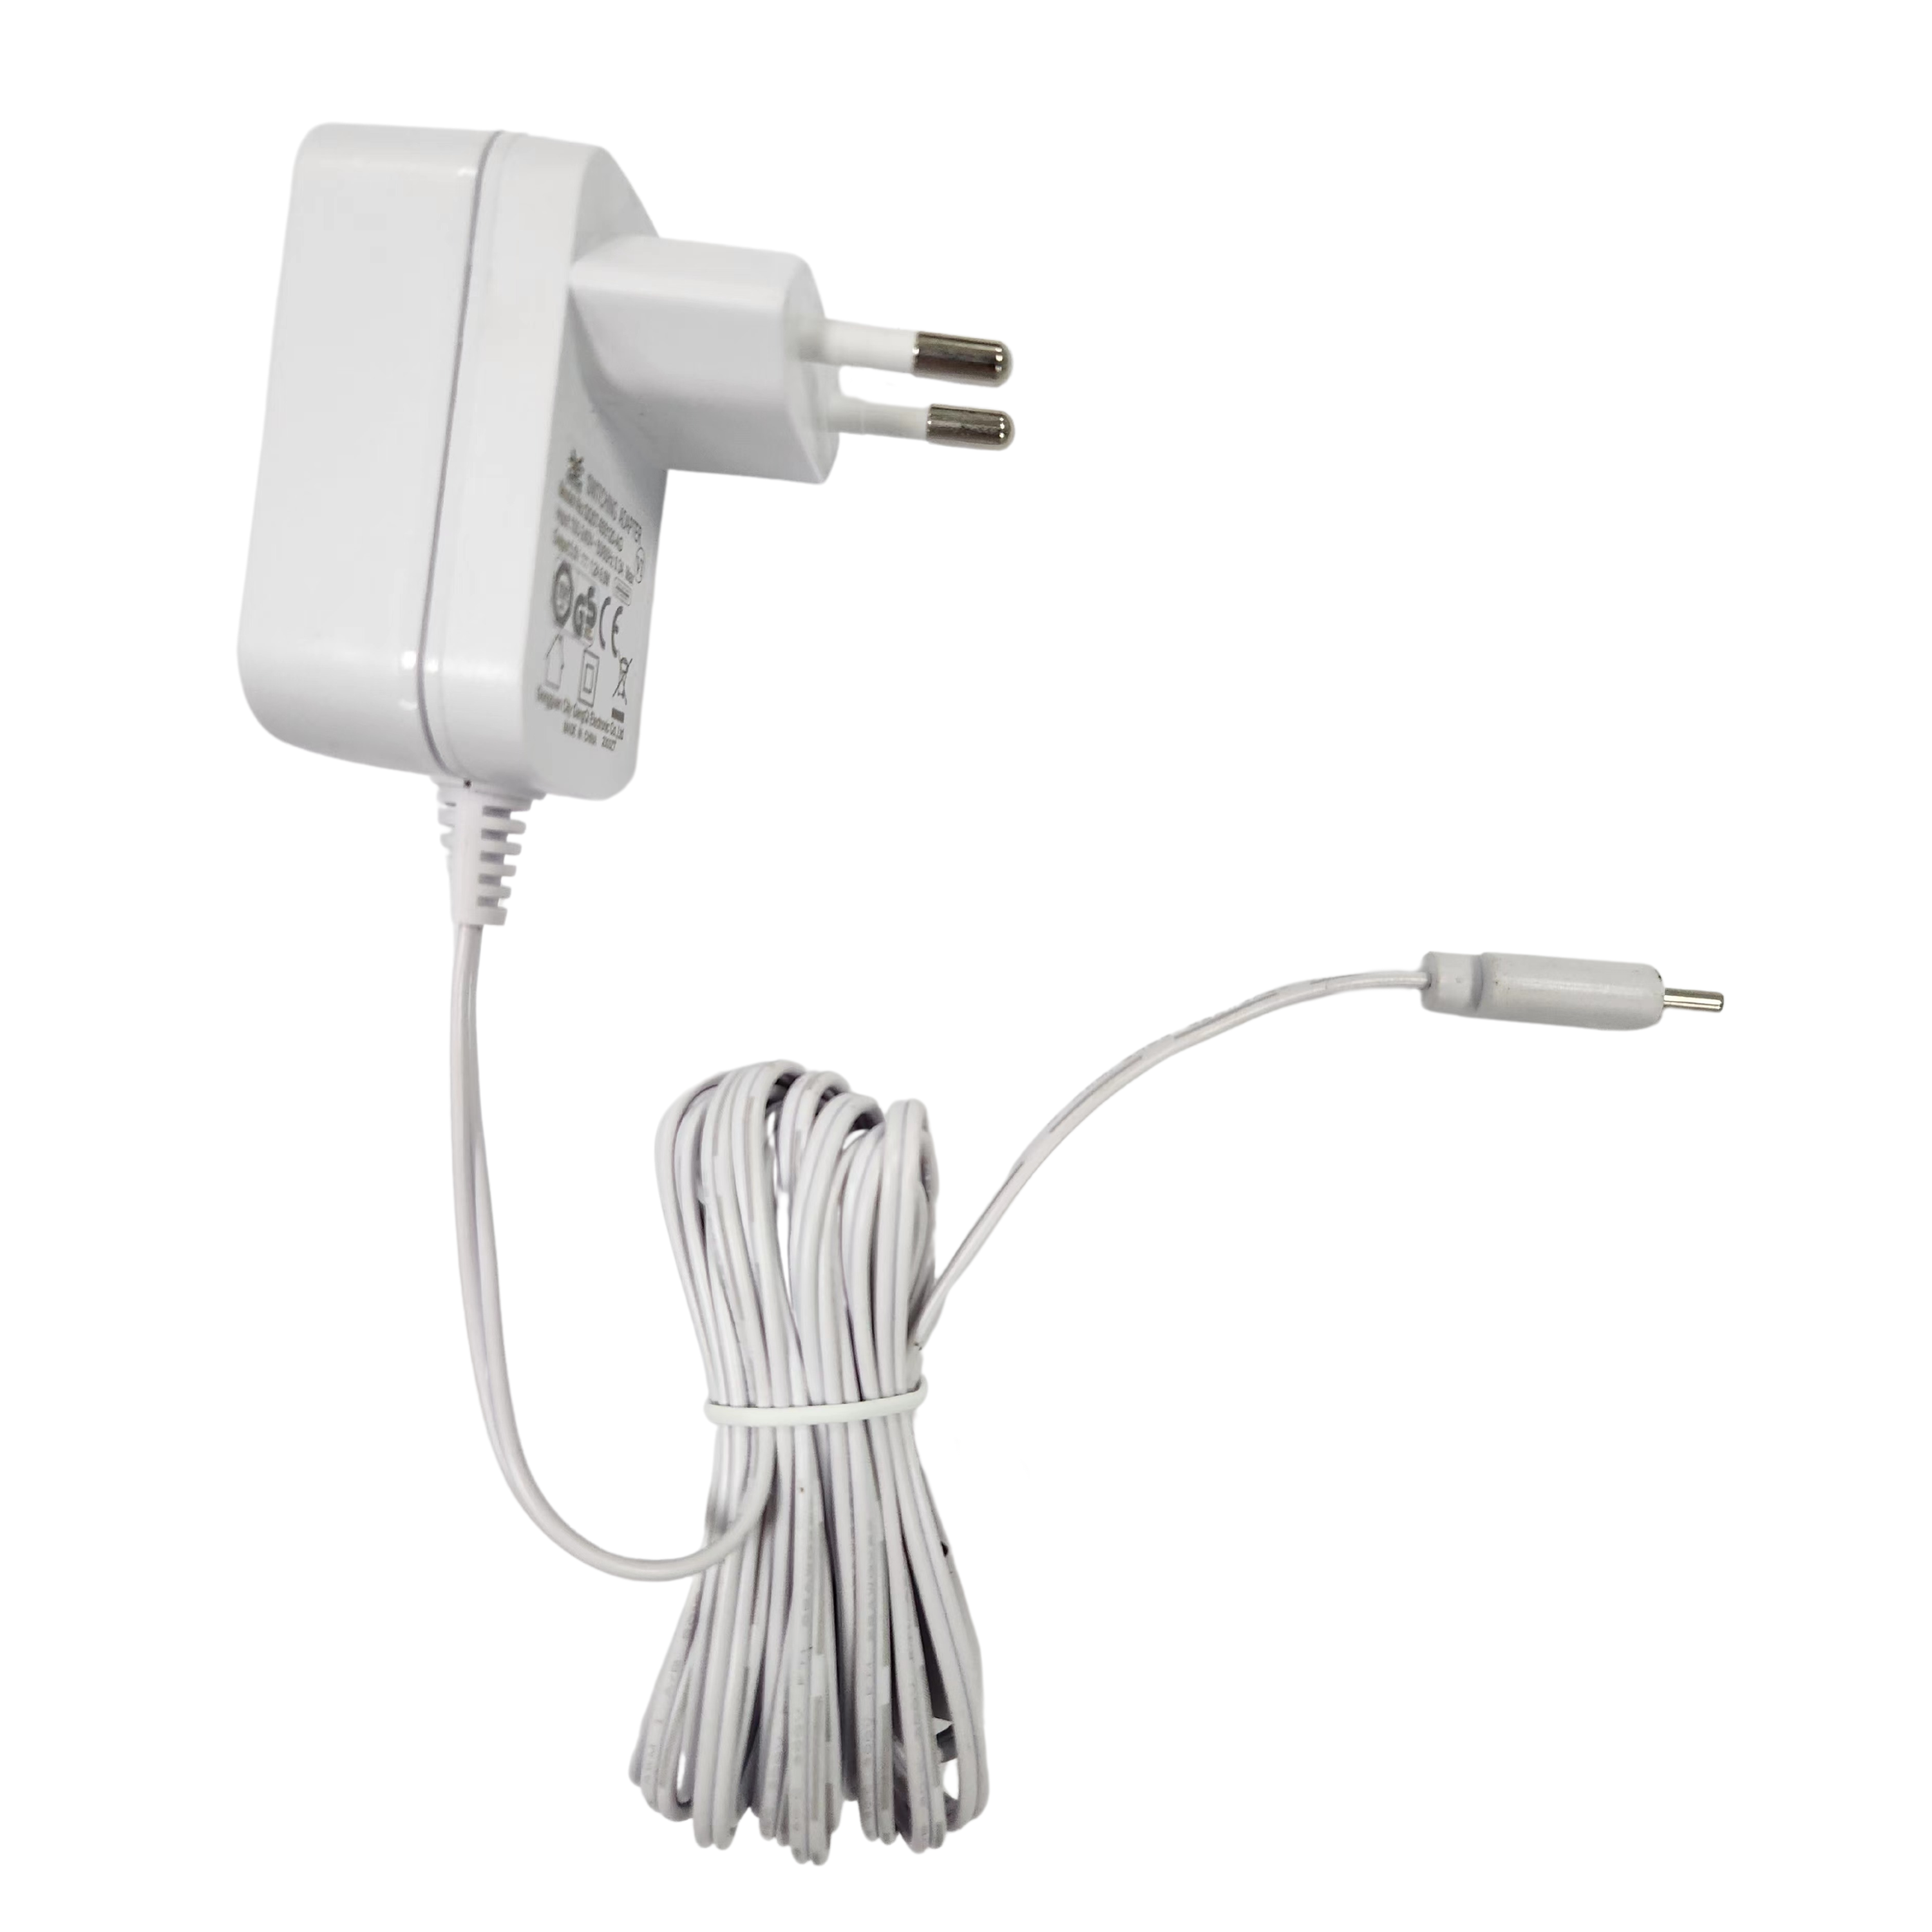 Power Adapter for Babysense Video Baby Monitors Models: MaxView